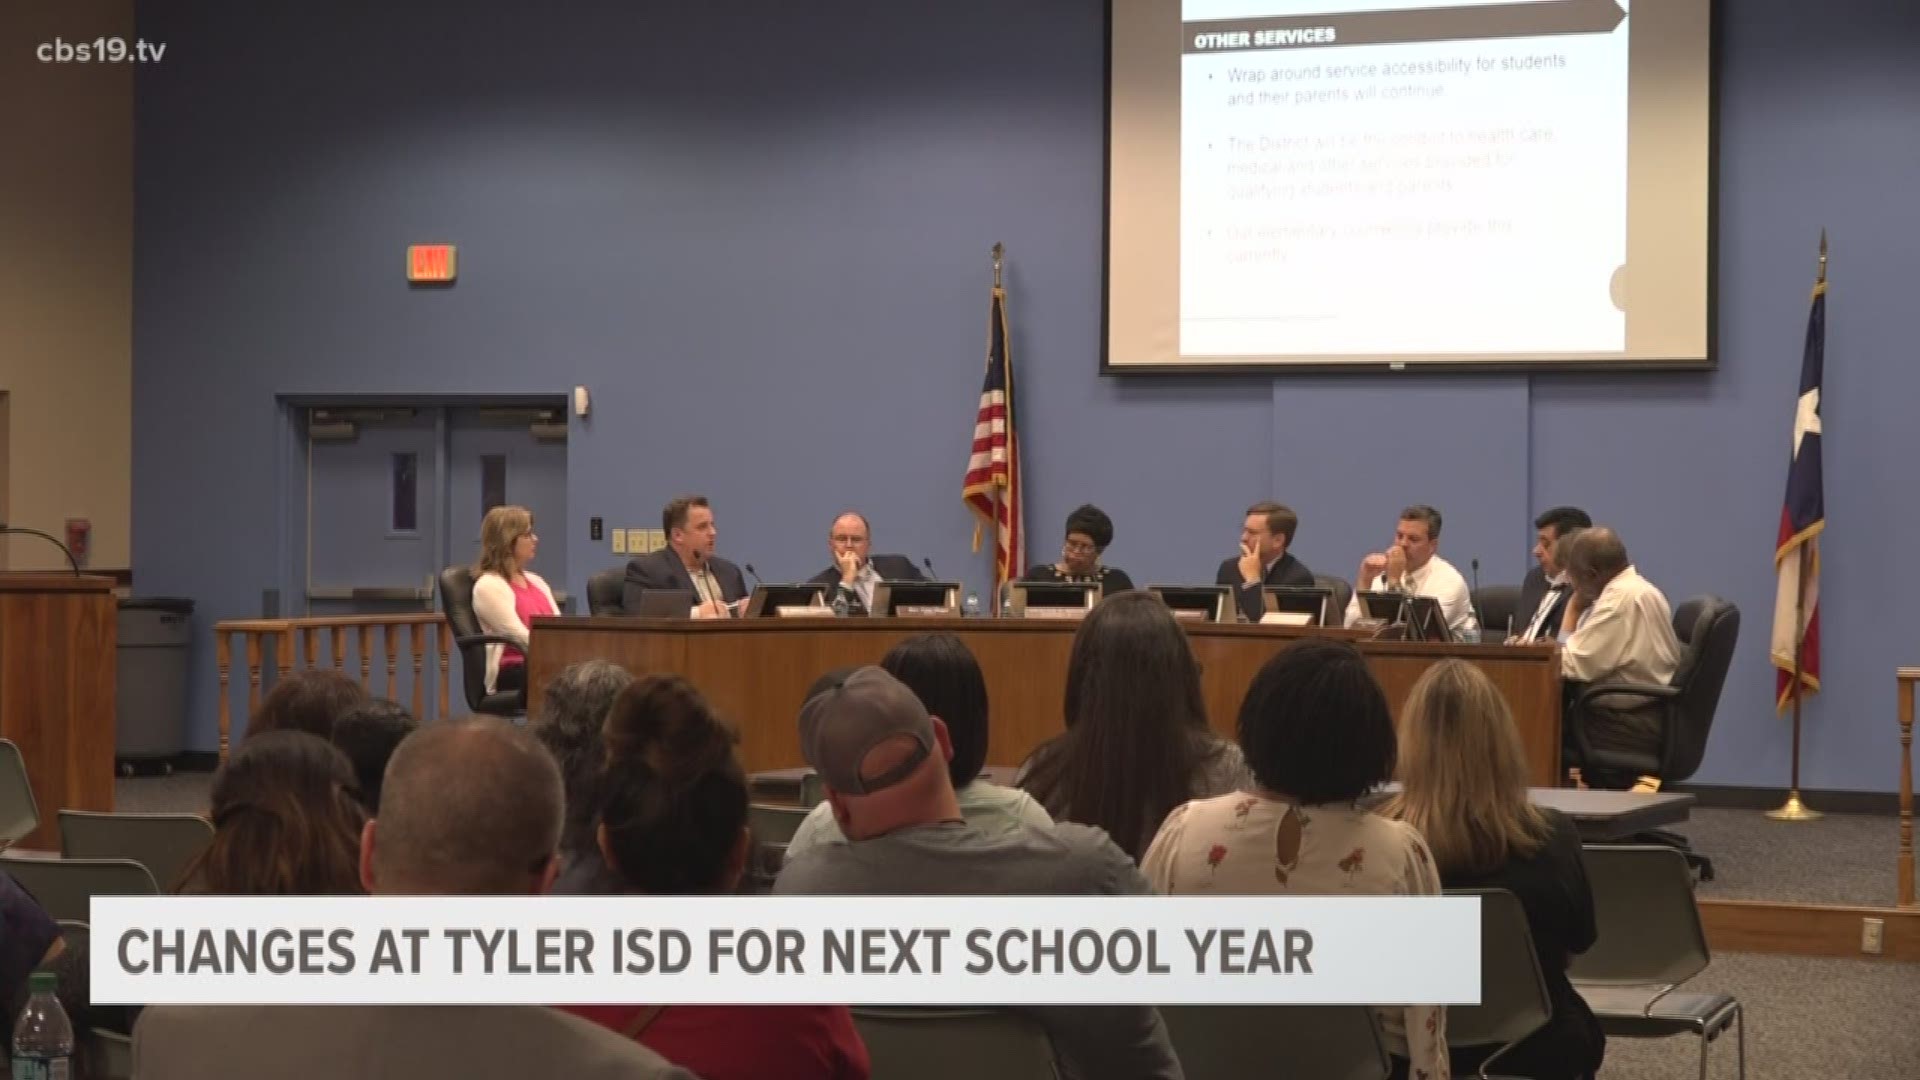 Changes at Tyler ISD for the 2019-2020 school year